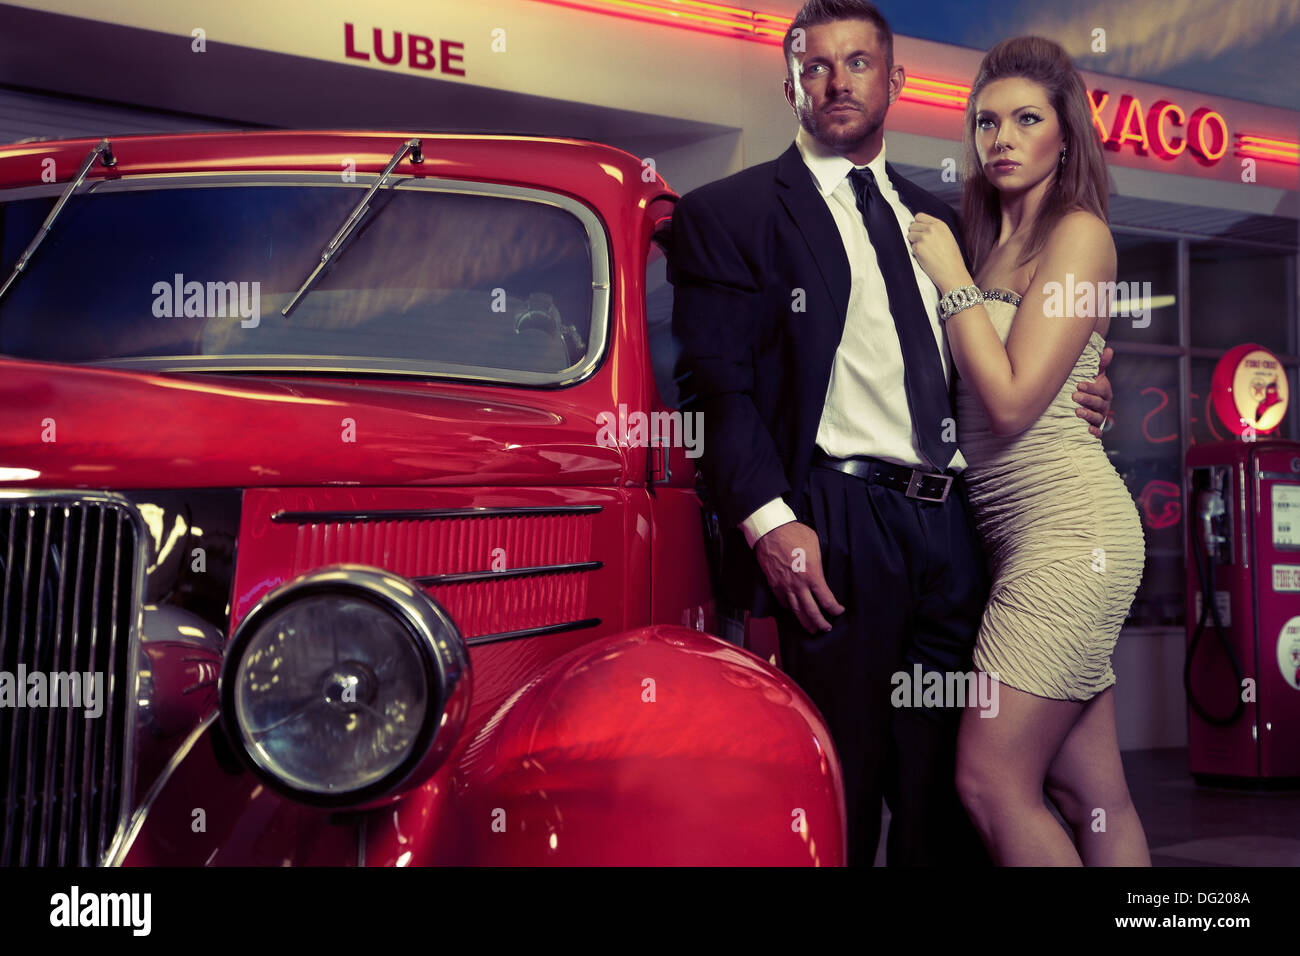 Well dressed man and woman next to antique red car in front of service station Stock Photo